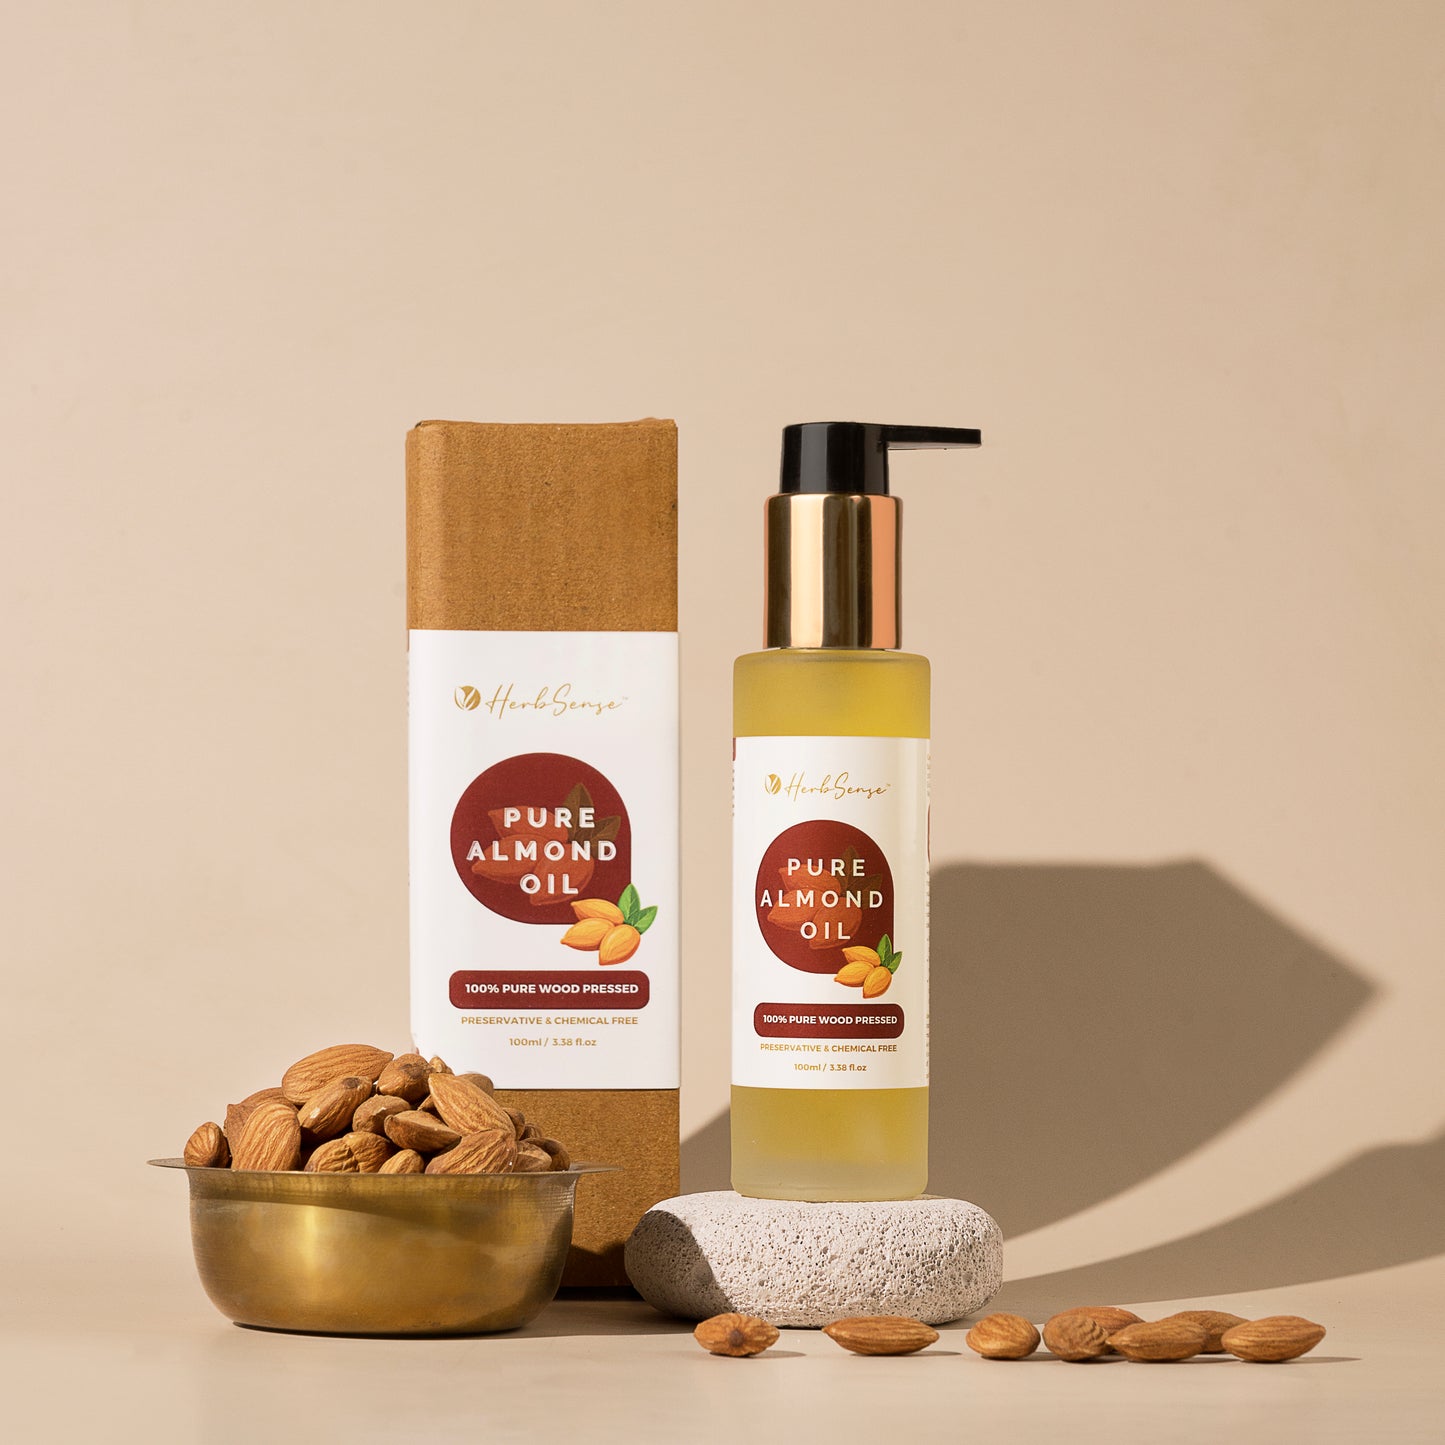 Pure Almond Oil- Wood Pressed | 100% Natural | Excellent For Skin & Hair